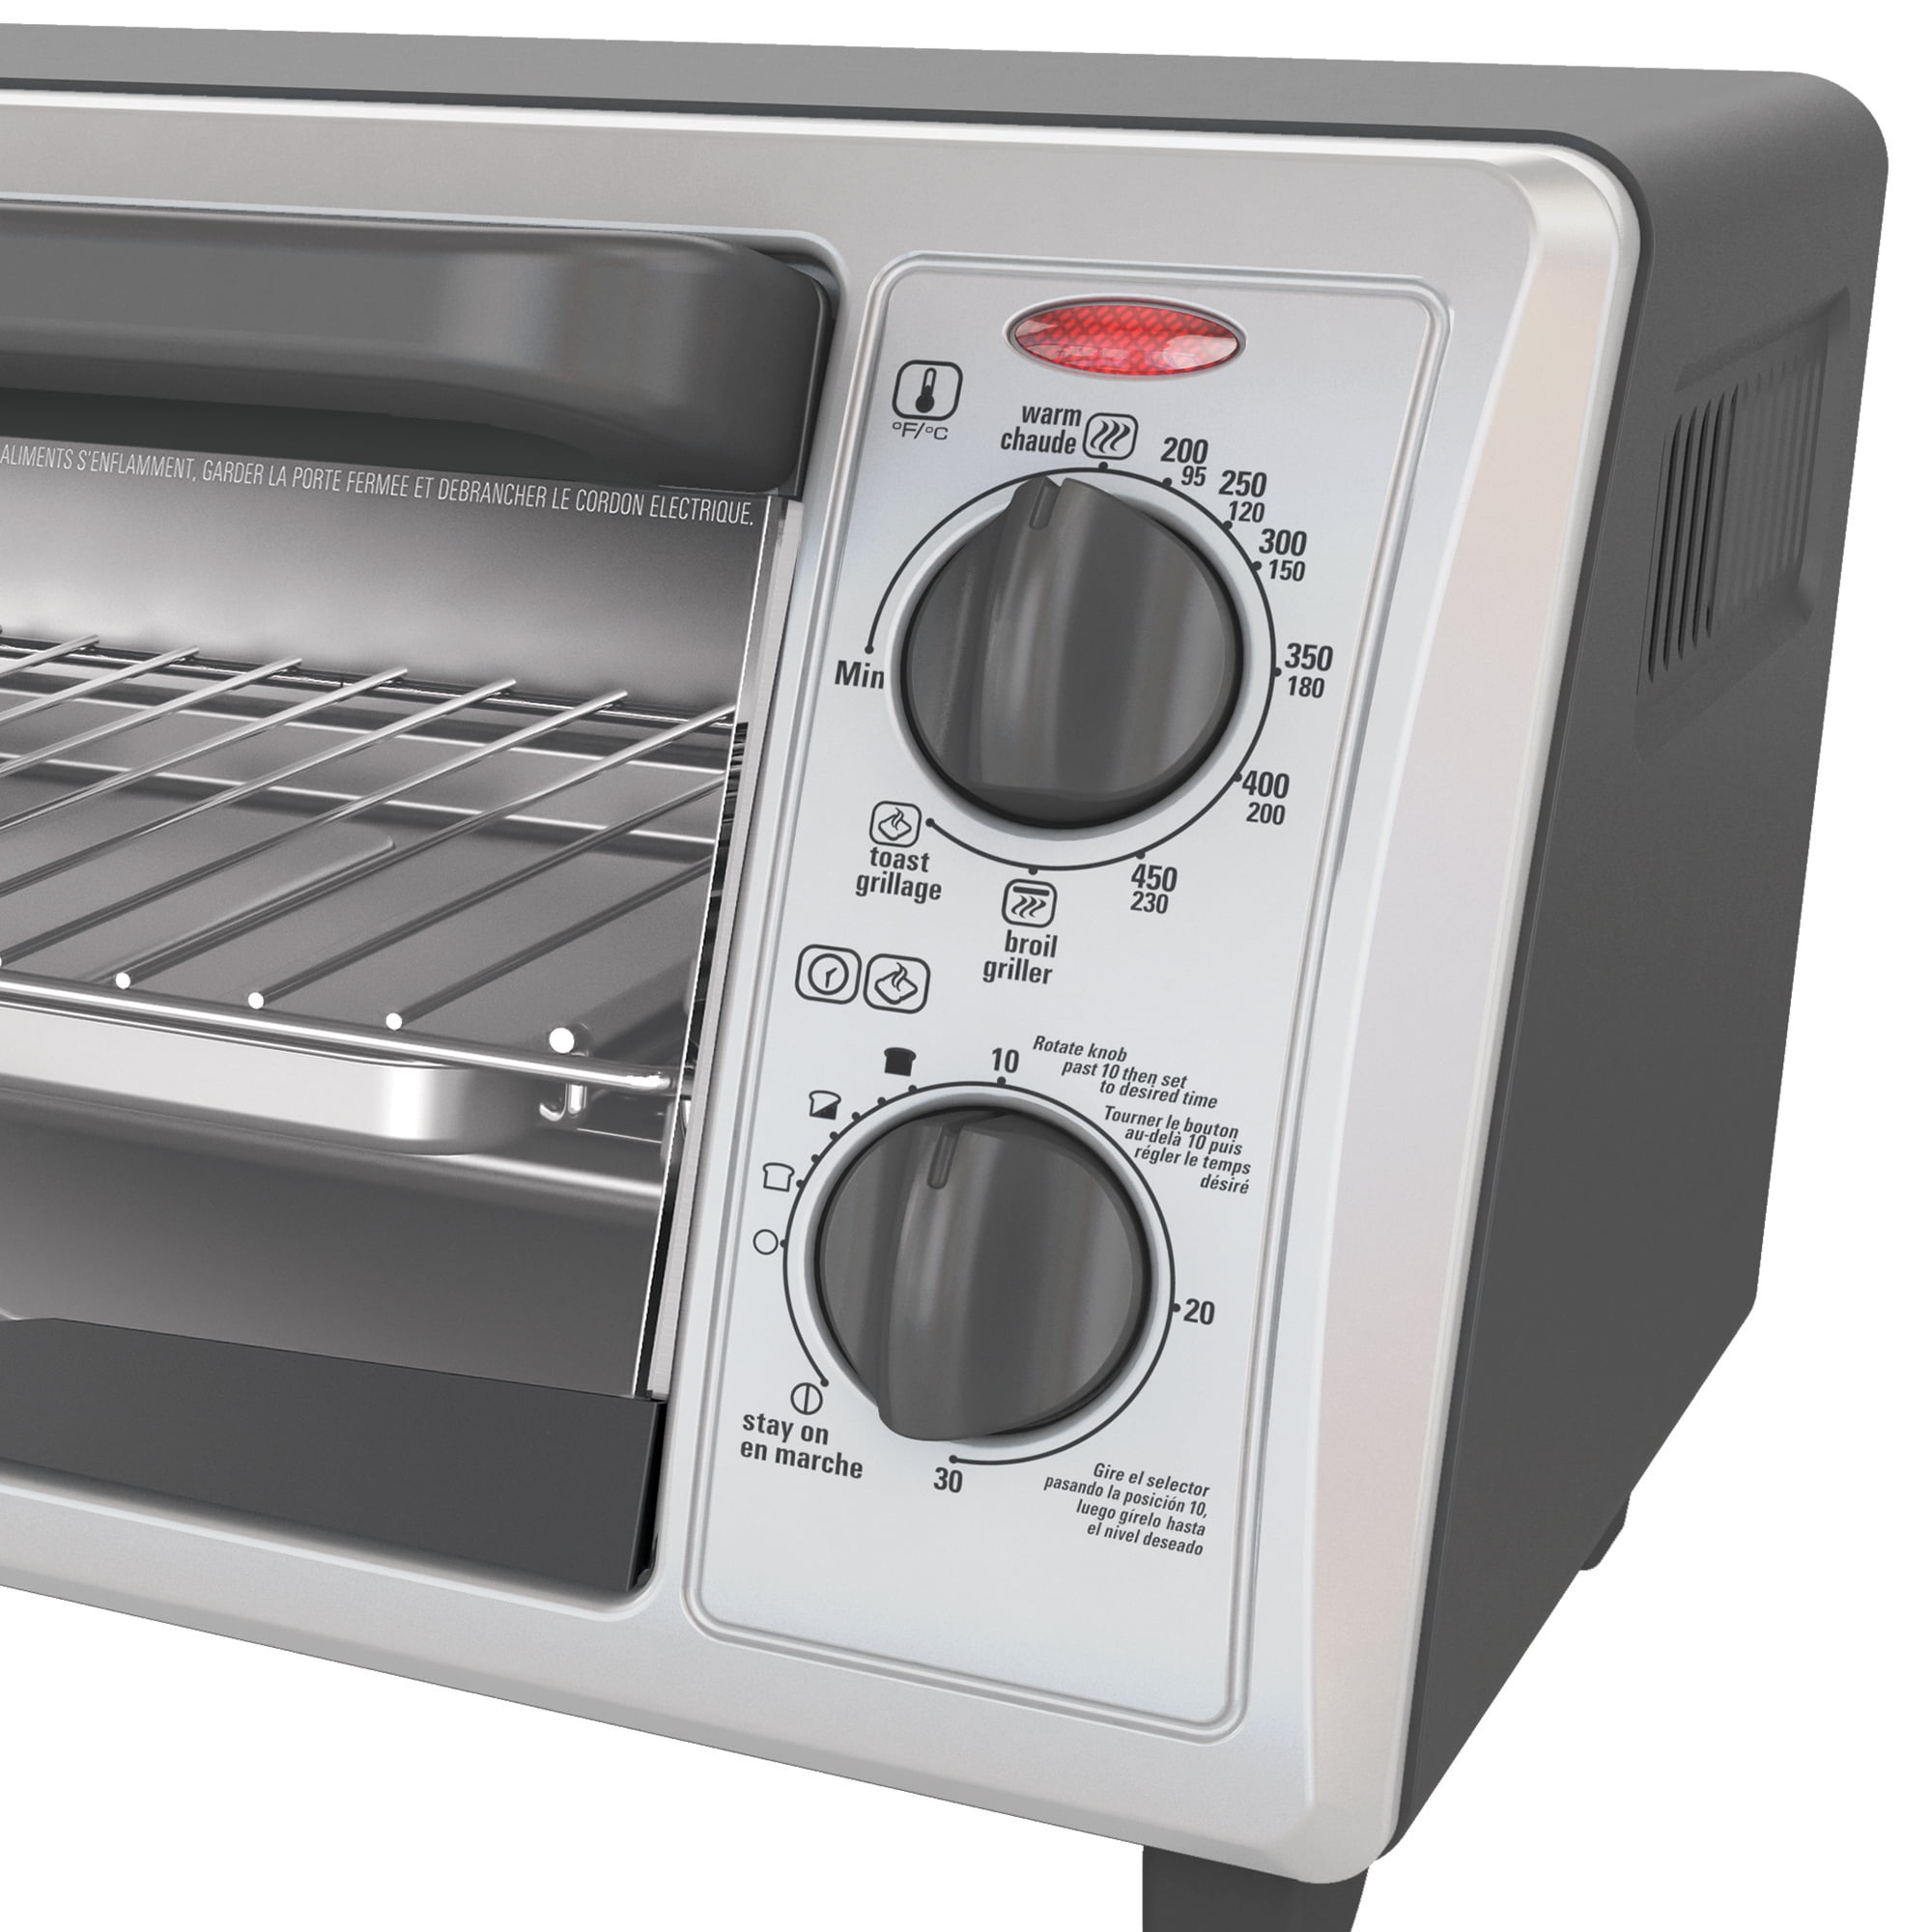 Black+Decker TO1303SB 4-Slice Toaster Oven, 14.5 x 8.8 x 10.8 inches,  Stainless Steel/Black